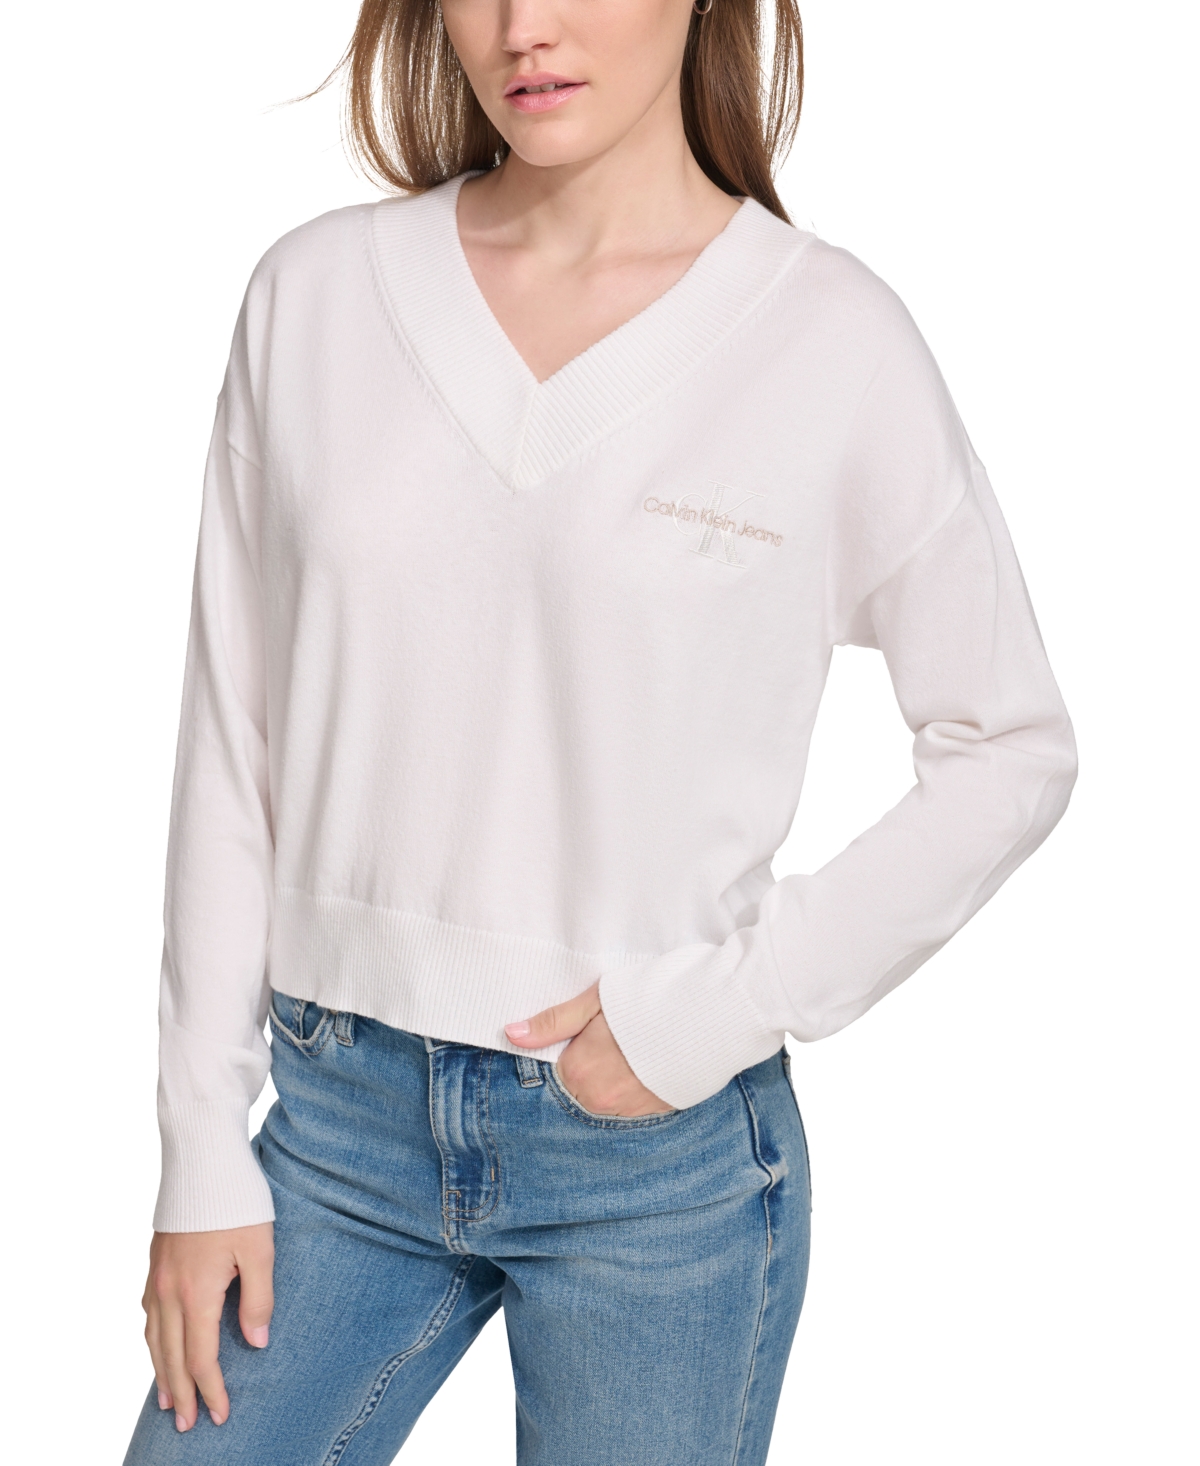 Calvin Klein Jeans Est.1978 Women's Dropped-shoulder Long-sleeve V-neck Top In White,white,suede